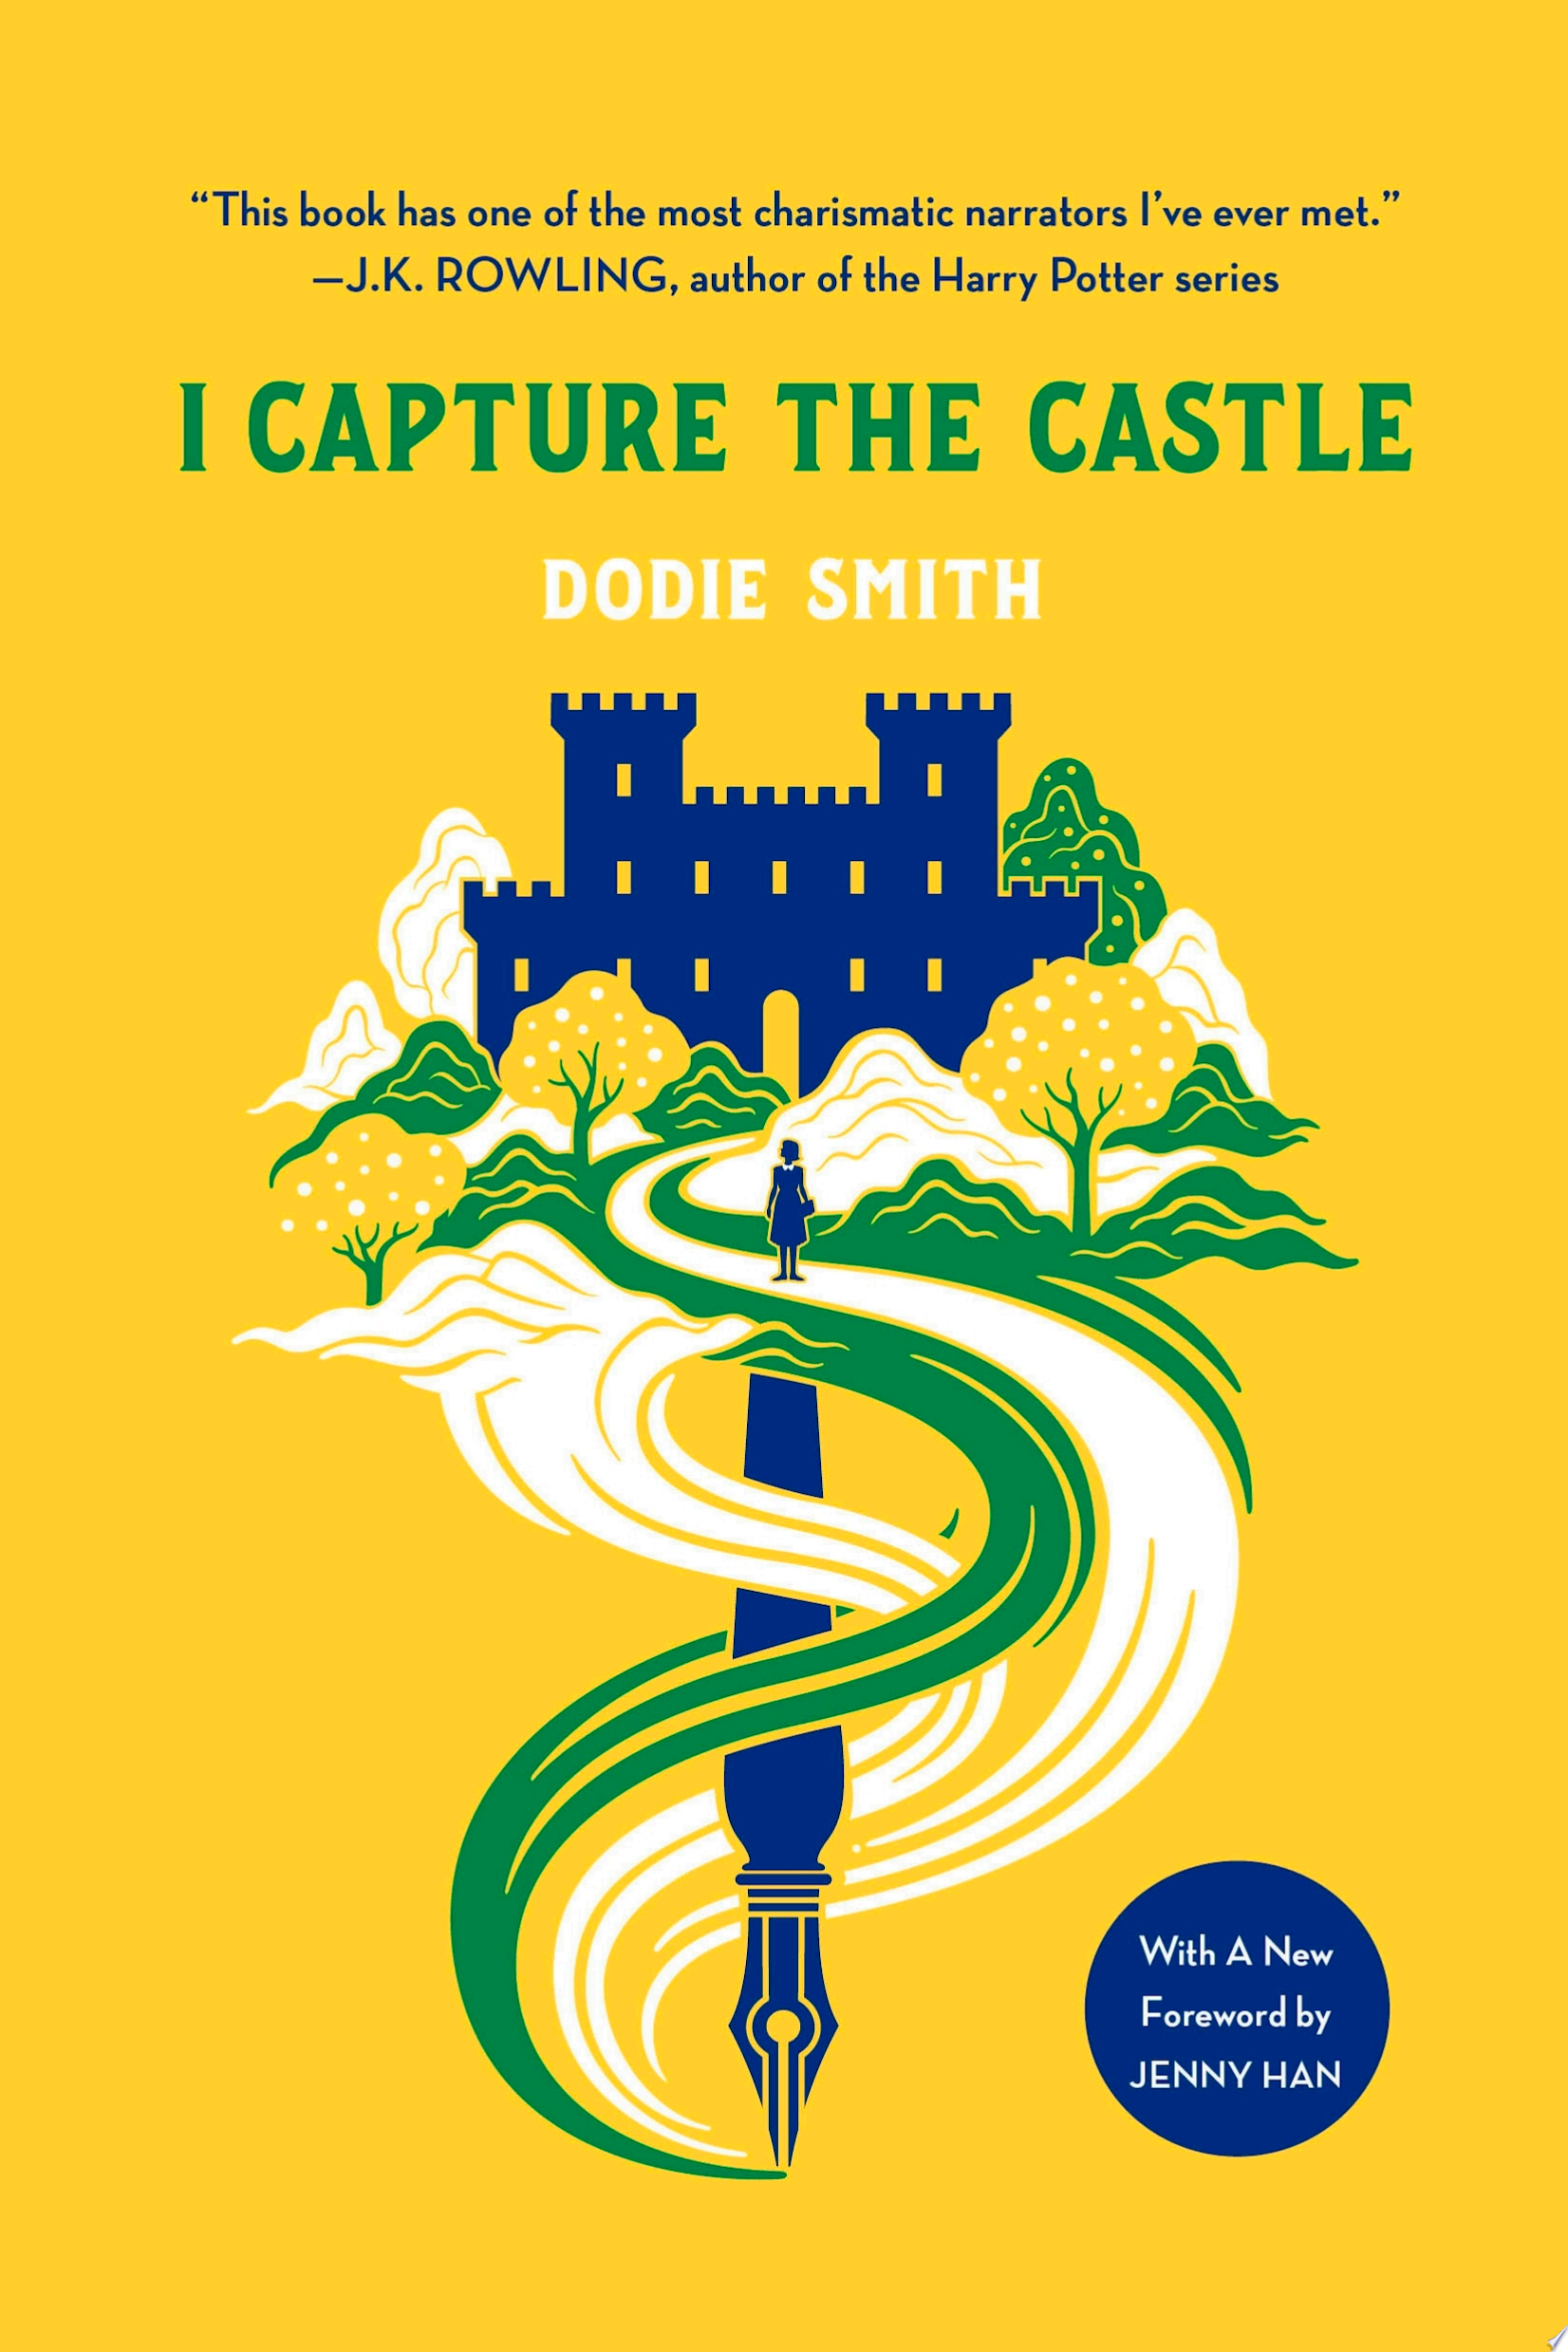 Image for "I Capture the Castle"